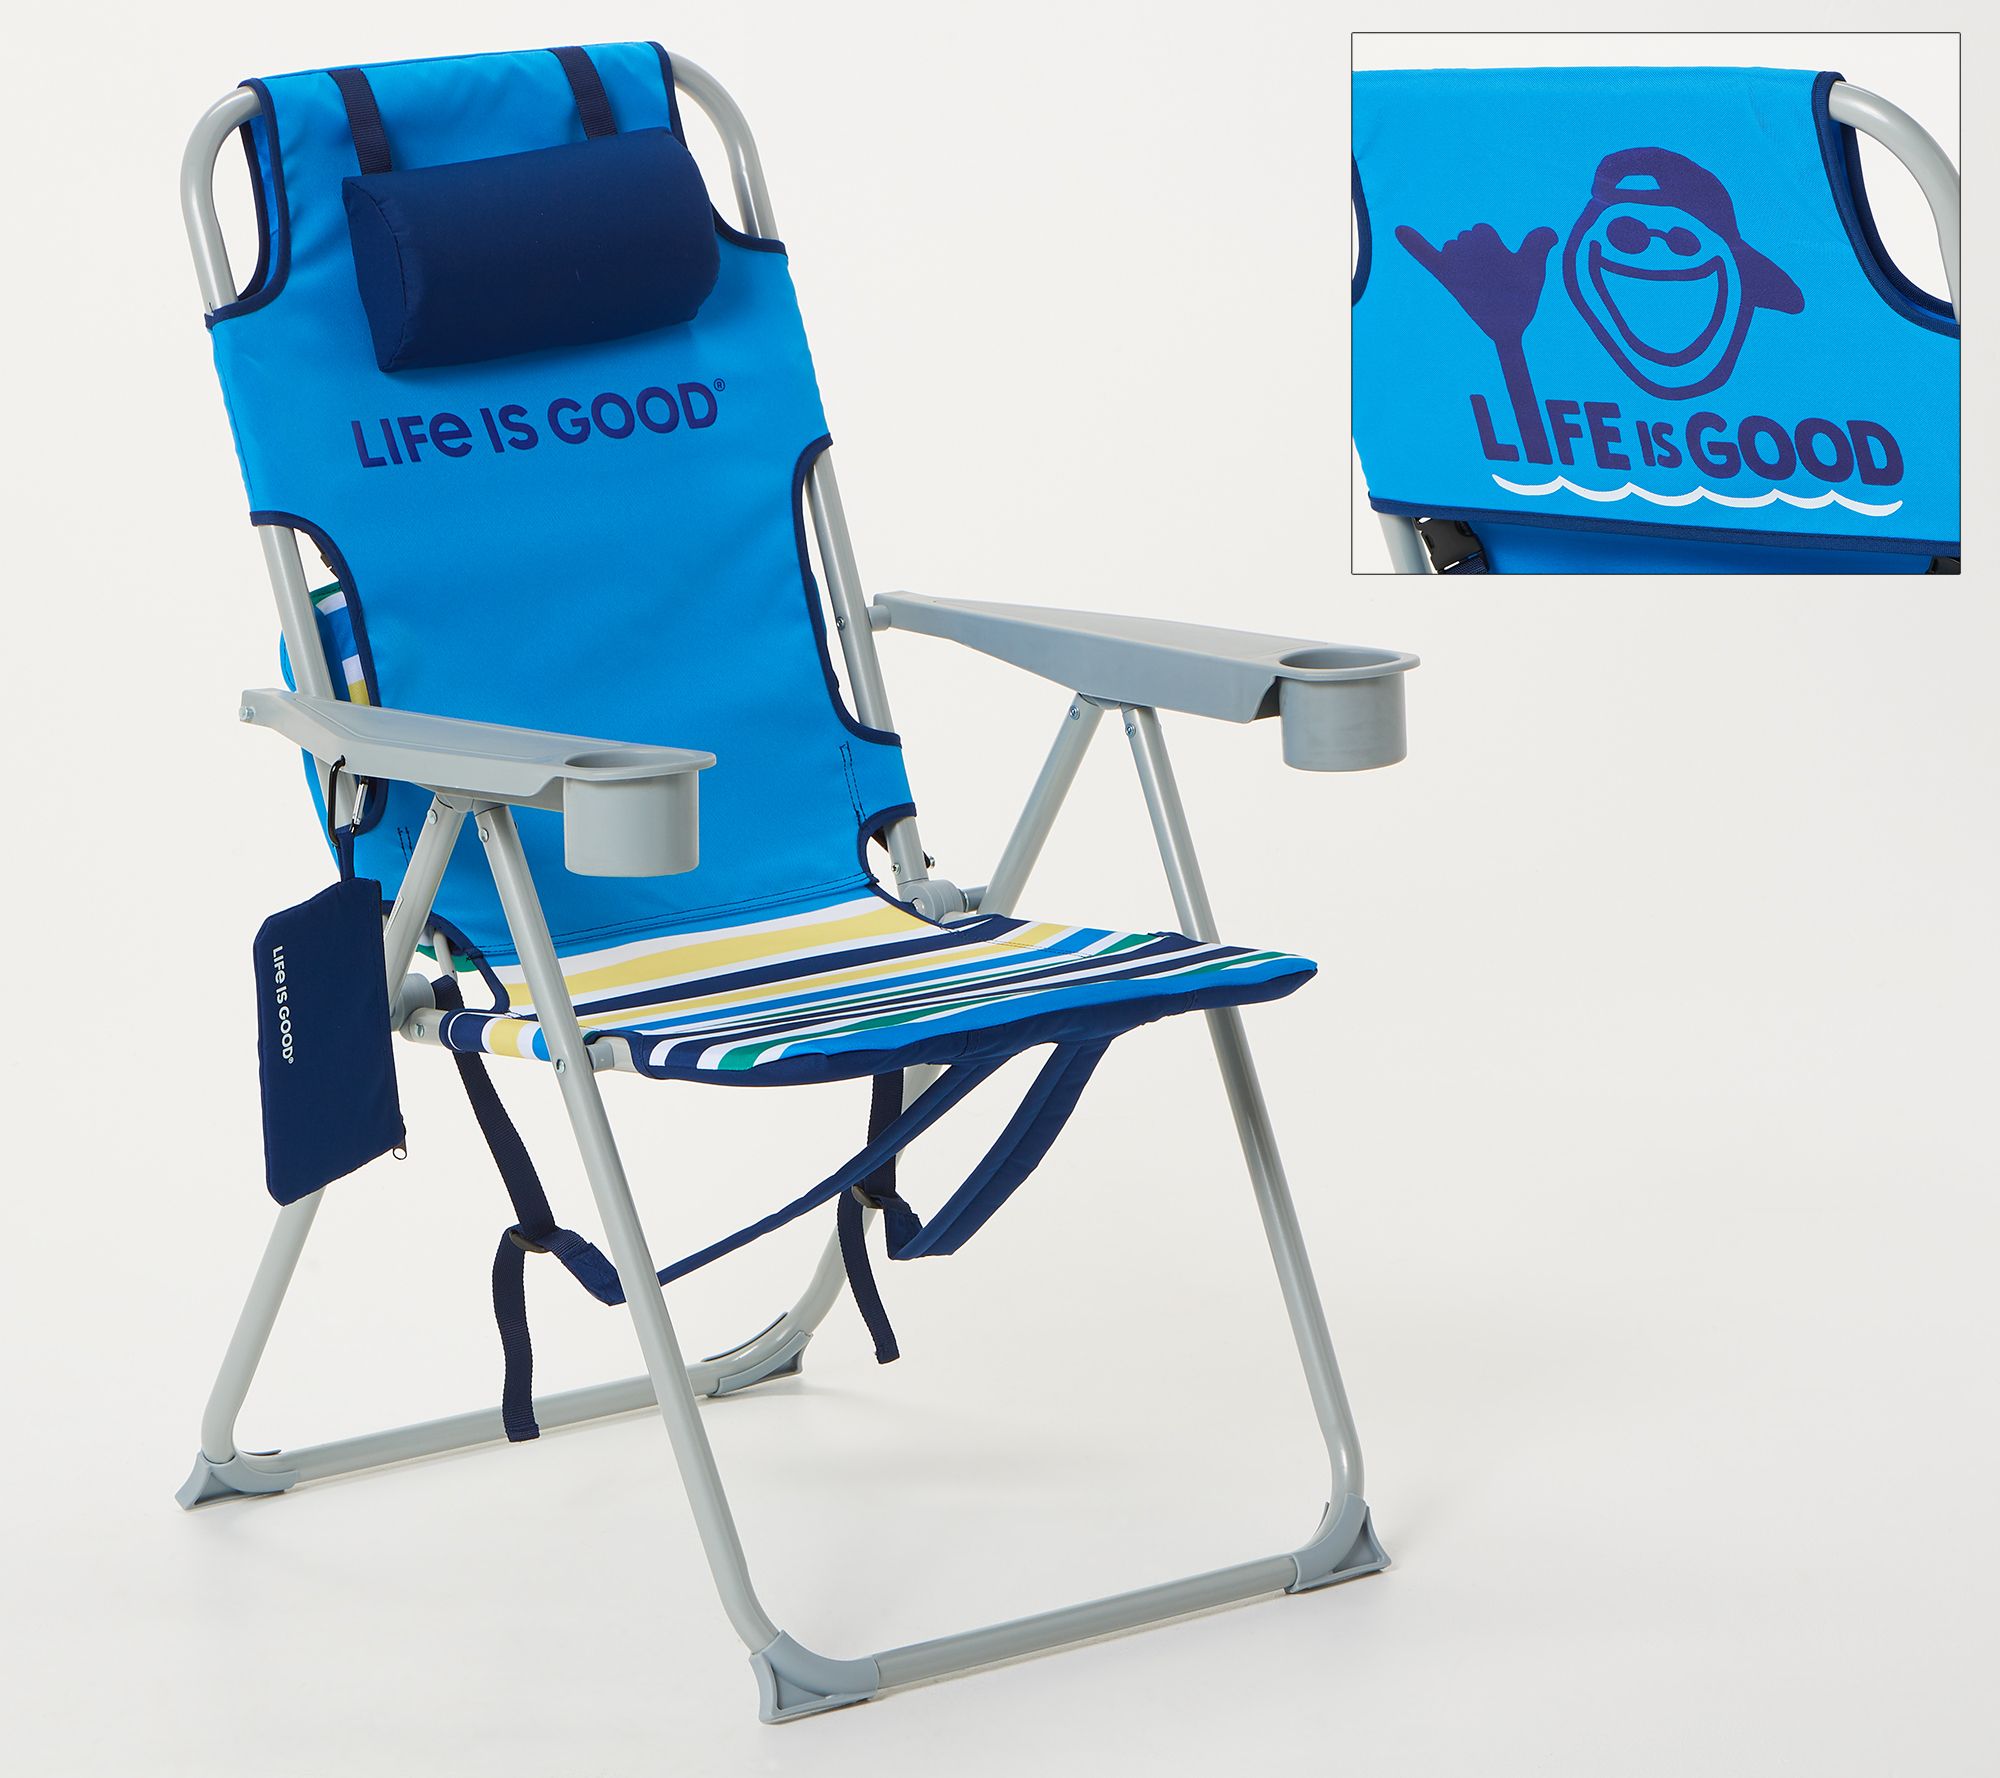 Minimalist Beach Chair With Cooler Pack for Large Space